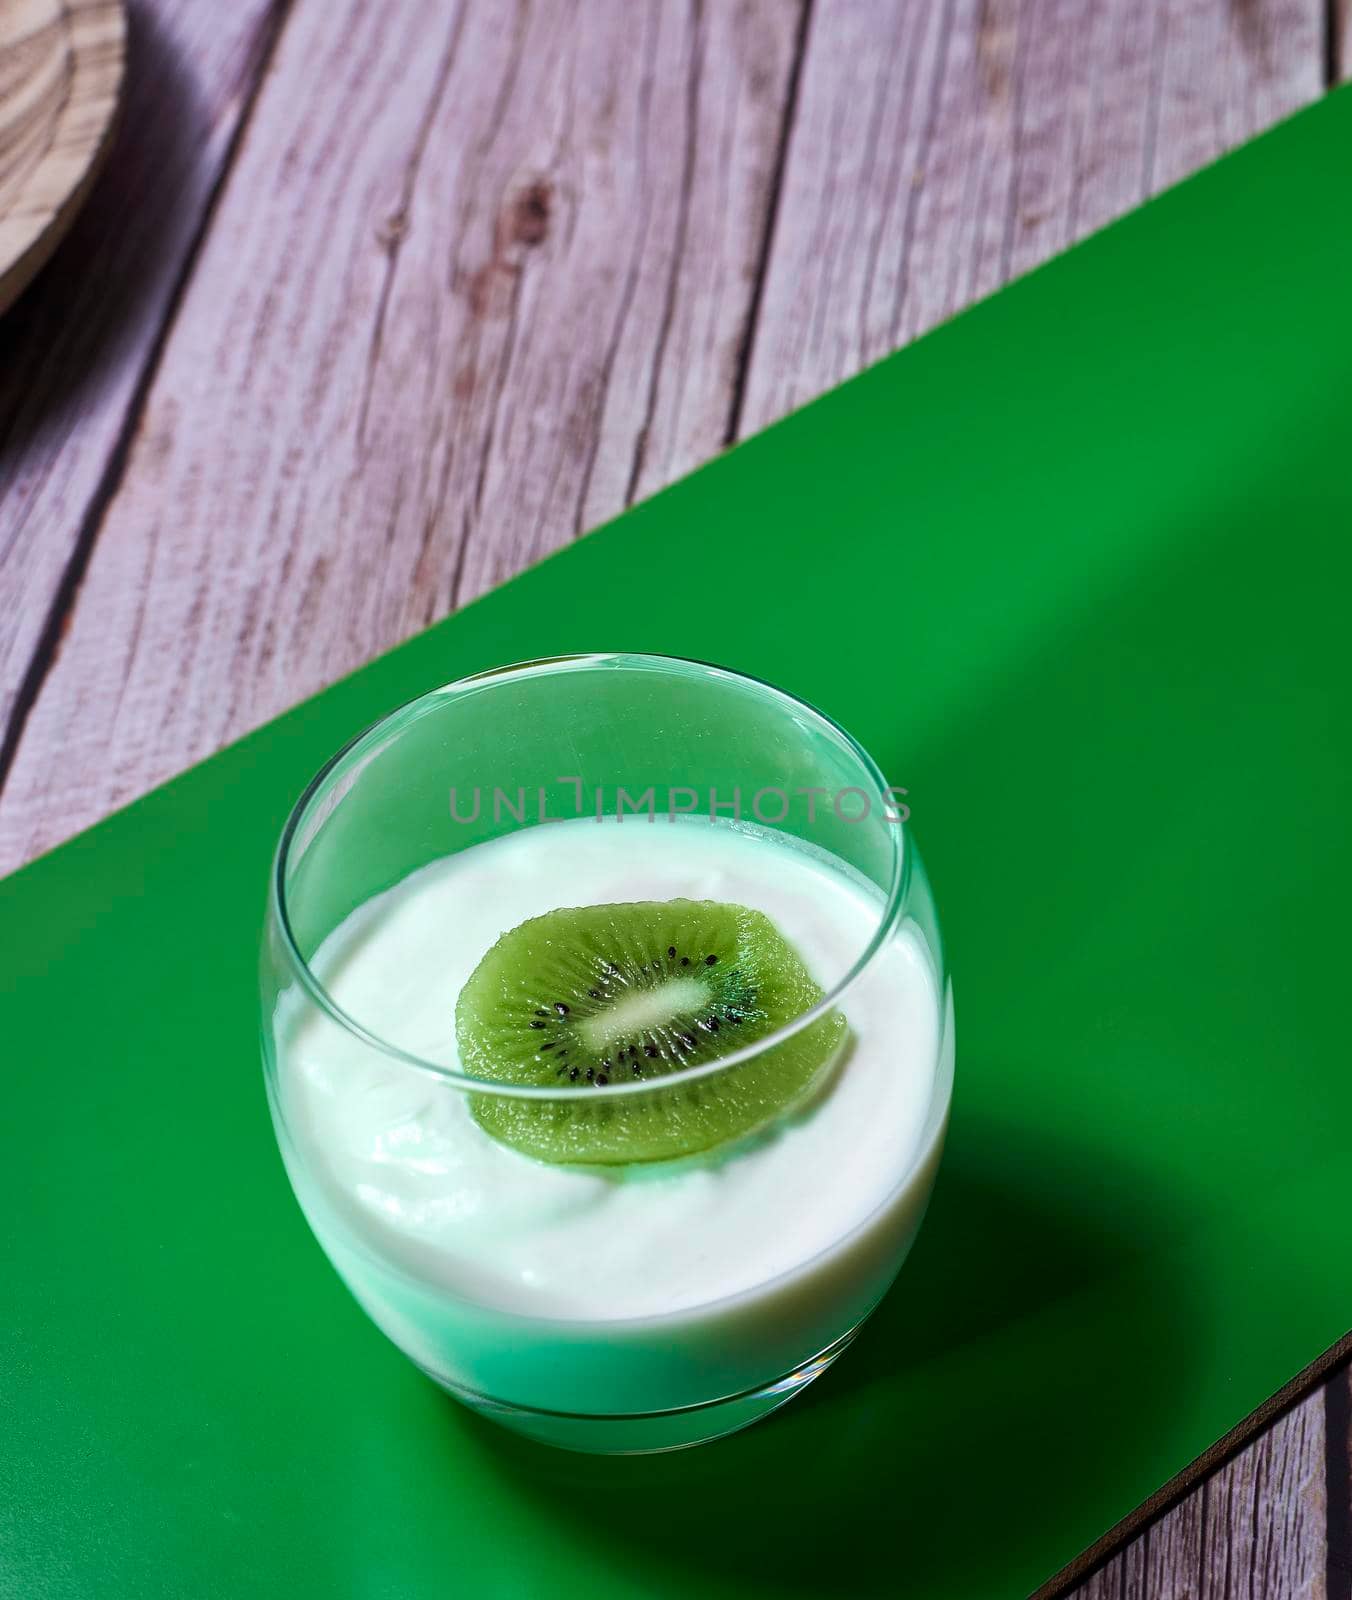 Glass of yoghurt with a sliced kiwi. Diagonal green wooden board, wooden planks